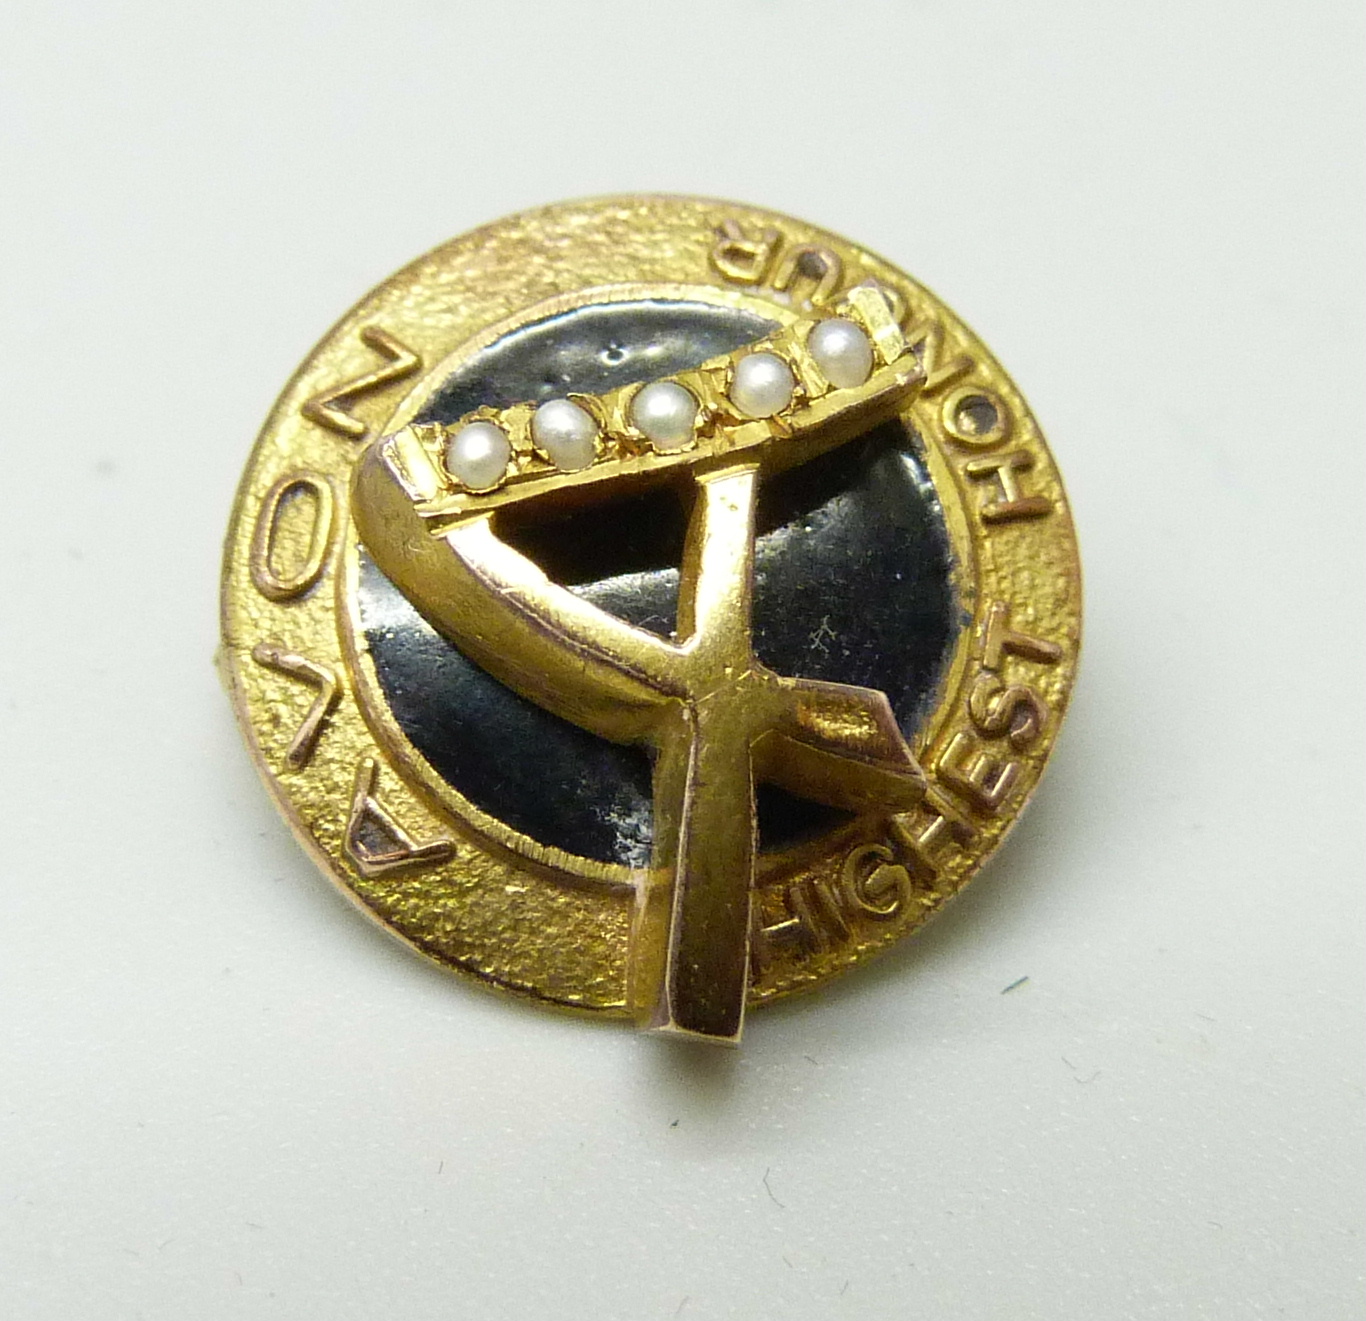 An Avon 9ct gold Highest Honour pin badge, 3.7g - Image 3 of 3